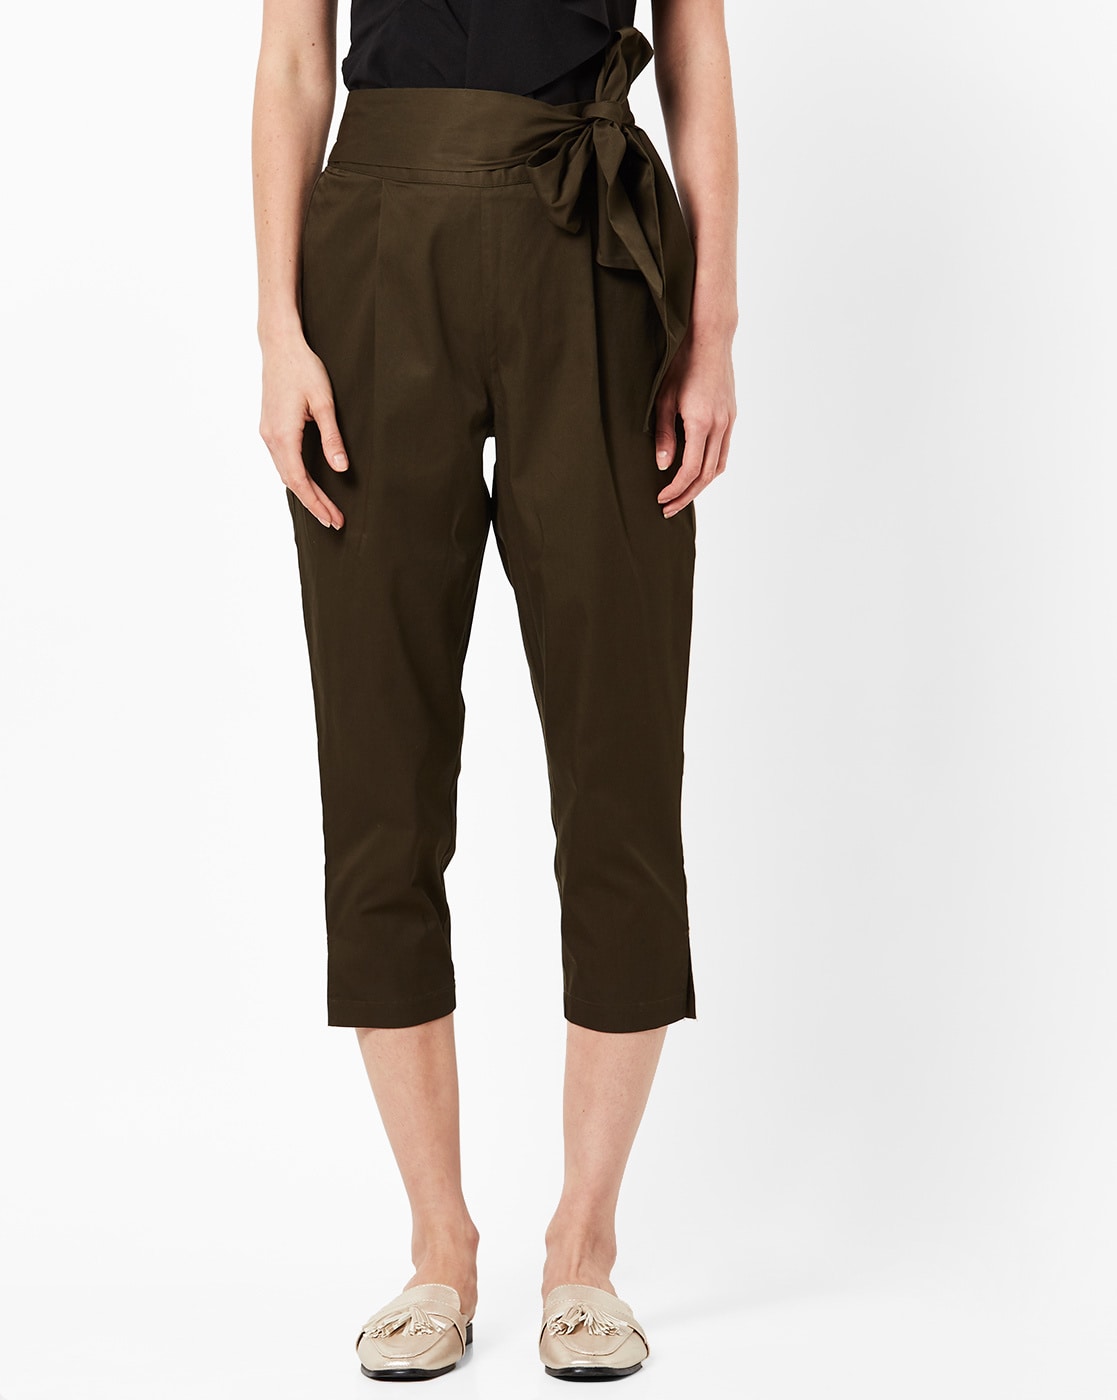 trousers with bow tie belt amazonTikTok Search